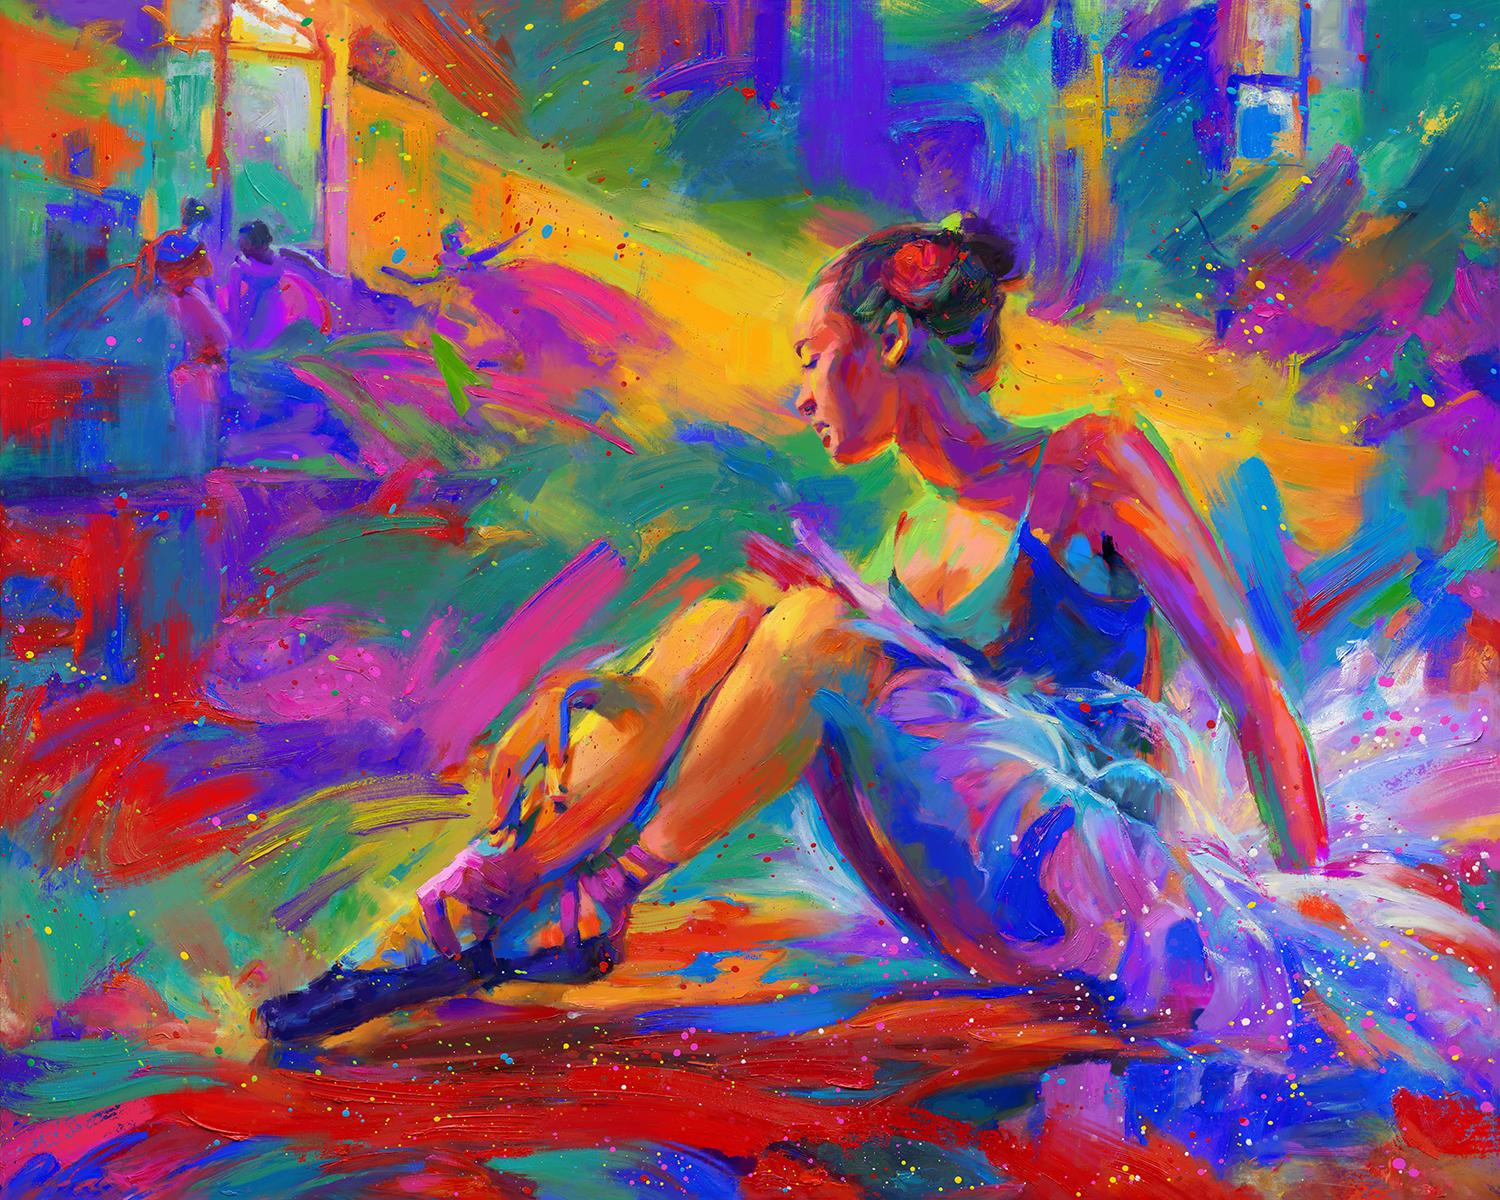 This licensed Blend Cota oil on canvas painting of Ballerina is brought to life utilizing Blend's now famous colorism technique. This painting captures what Ballerina brings to the floor when performing. This one-of-a-kind, licensed painting comes